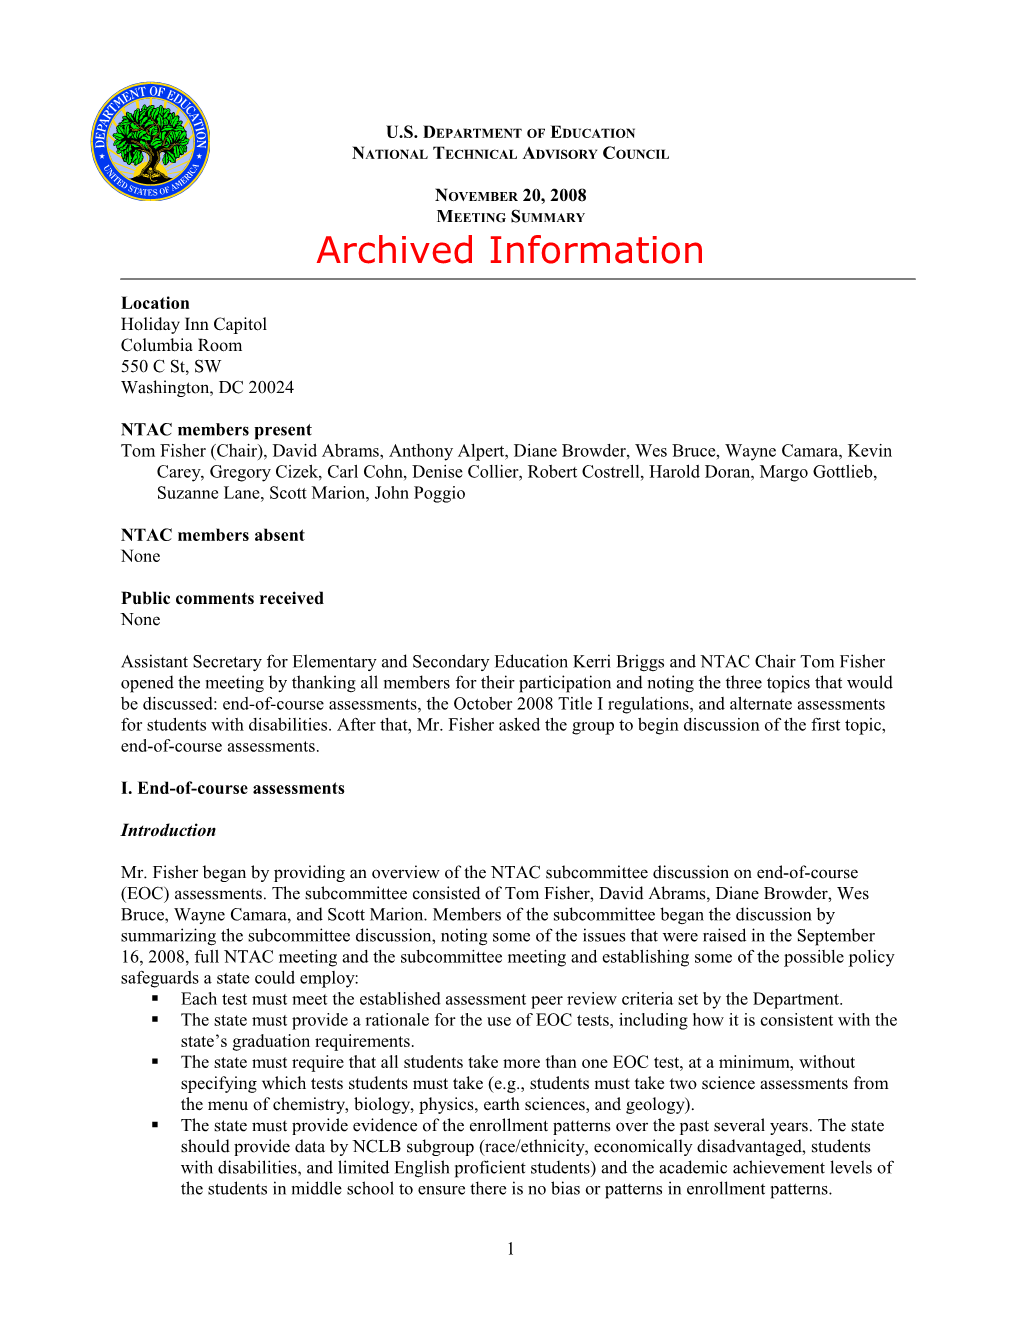 Archived: National Technical Advisory Council (NTAC) November 20, 2008 Meeting Summary (MS WORD)